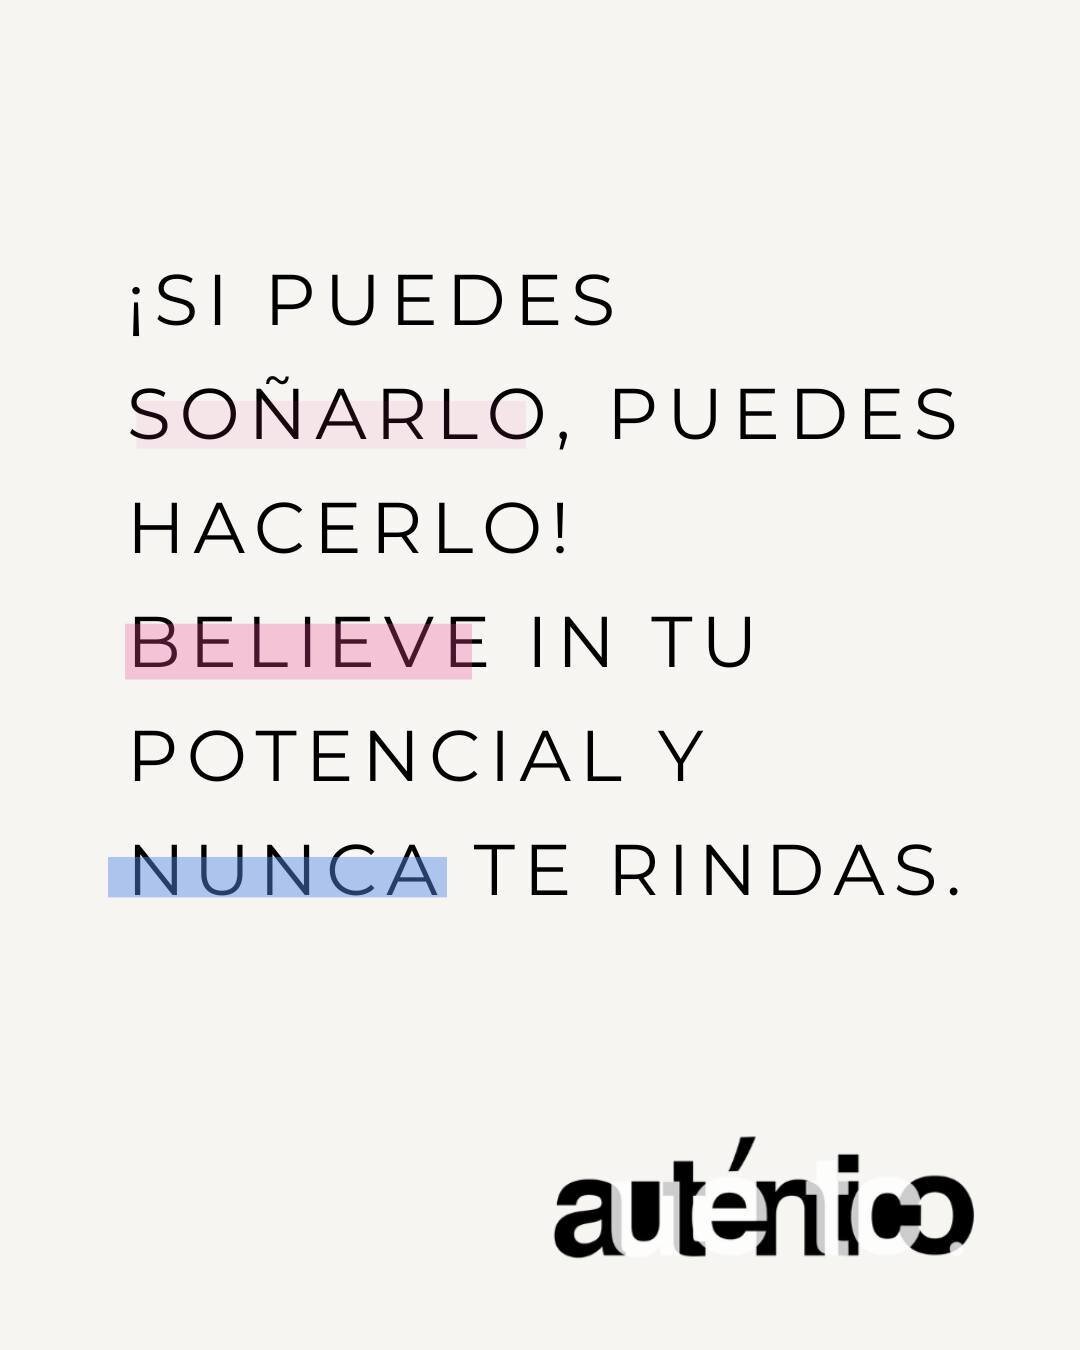 Empieza la semana inspirad@
Let the week begin with inspiration.

If you can dream it, you can do it! Believe in your potential and never give up.